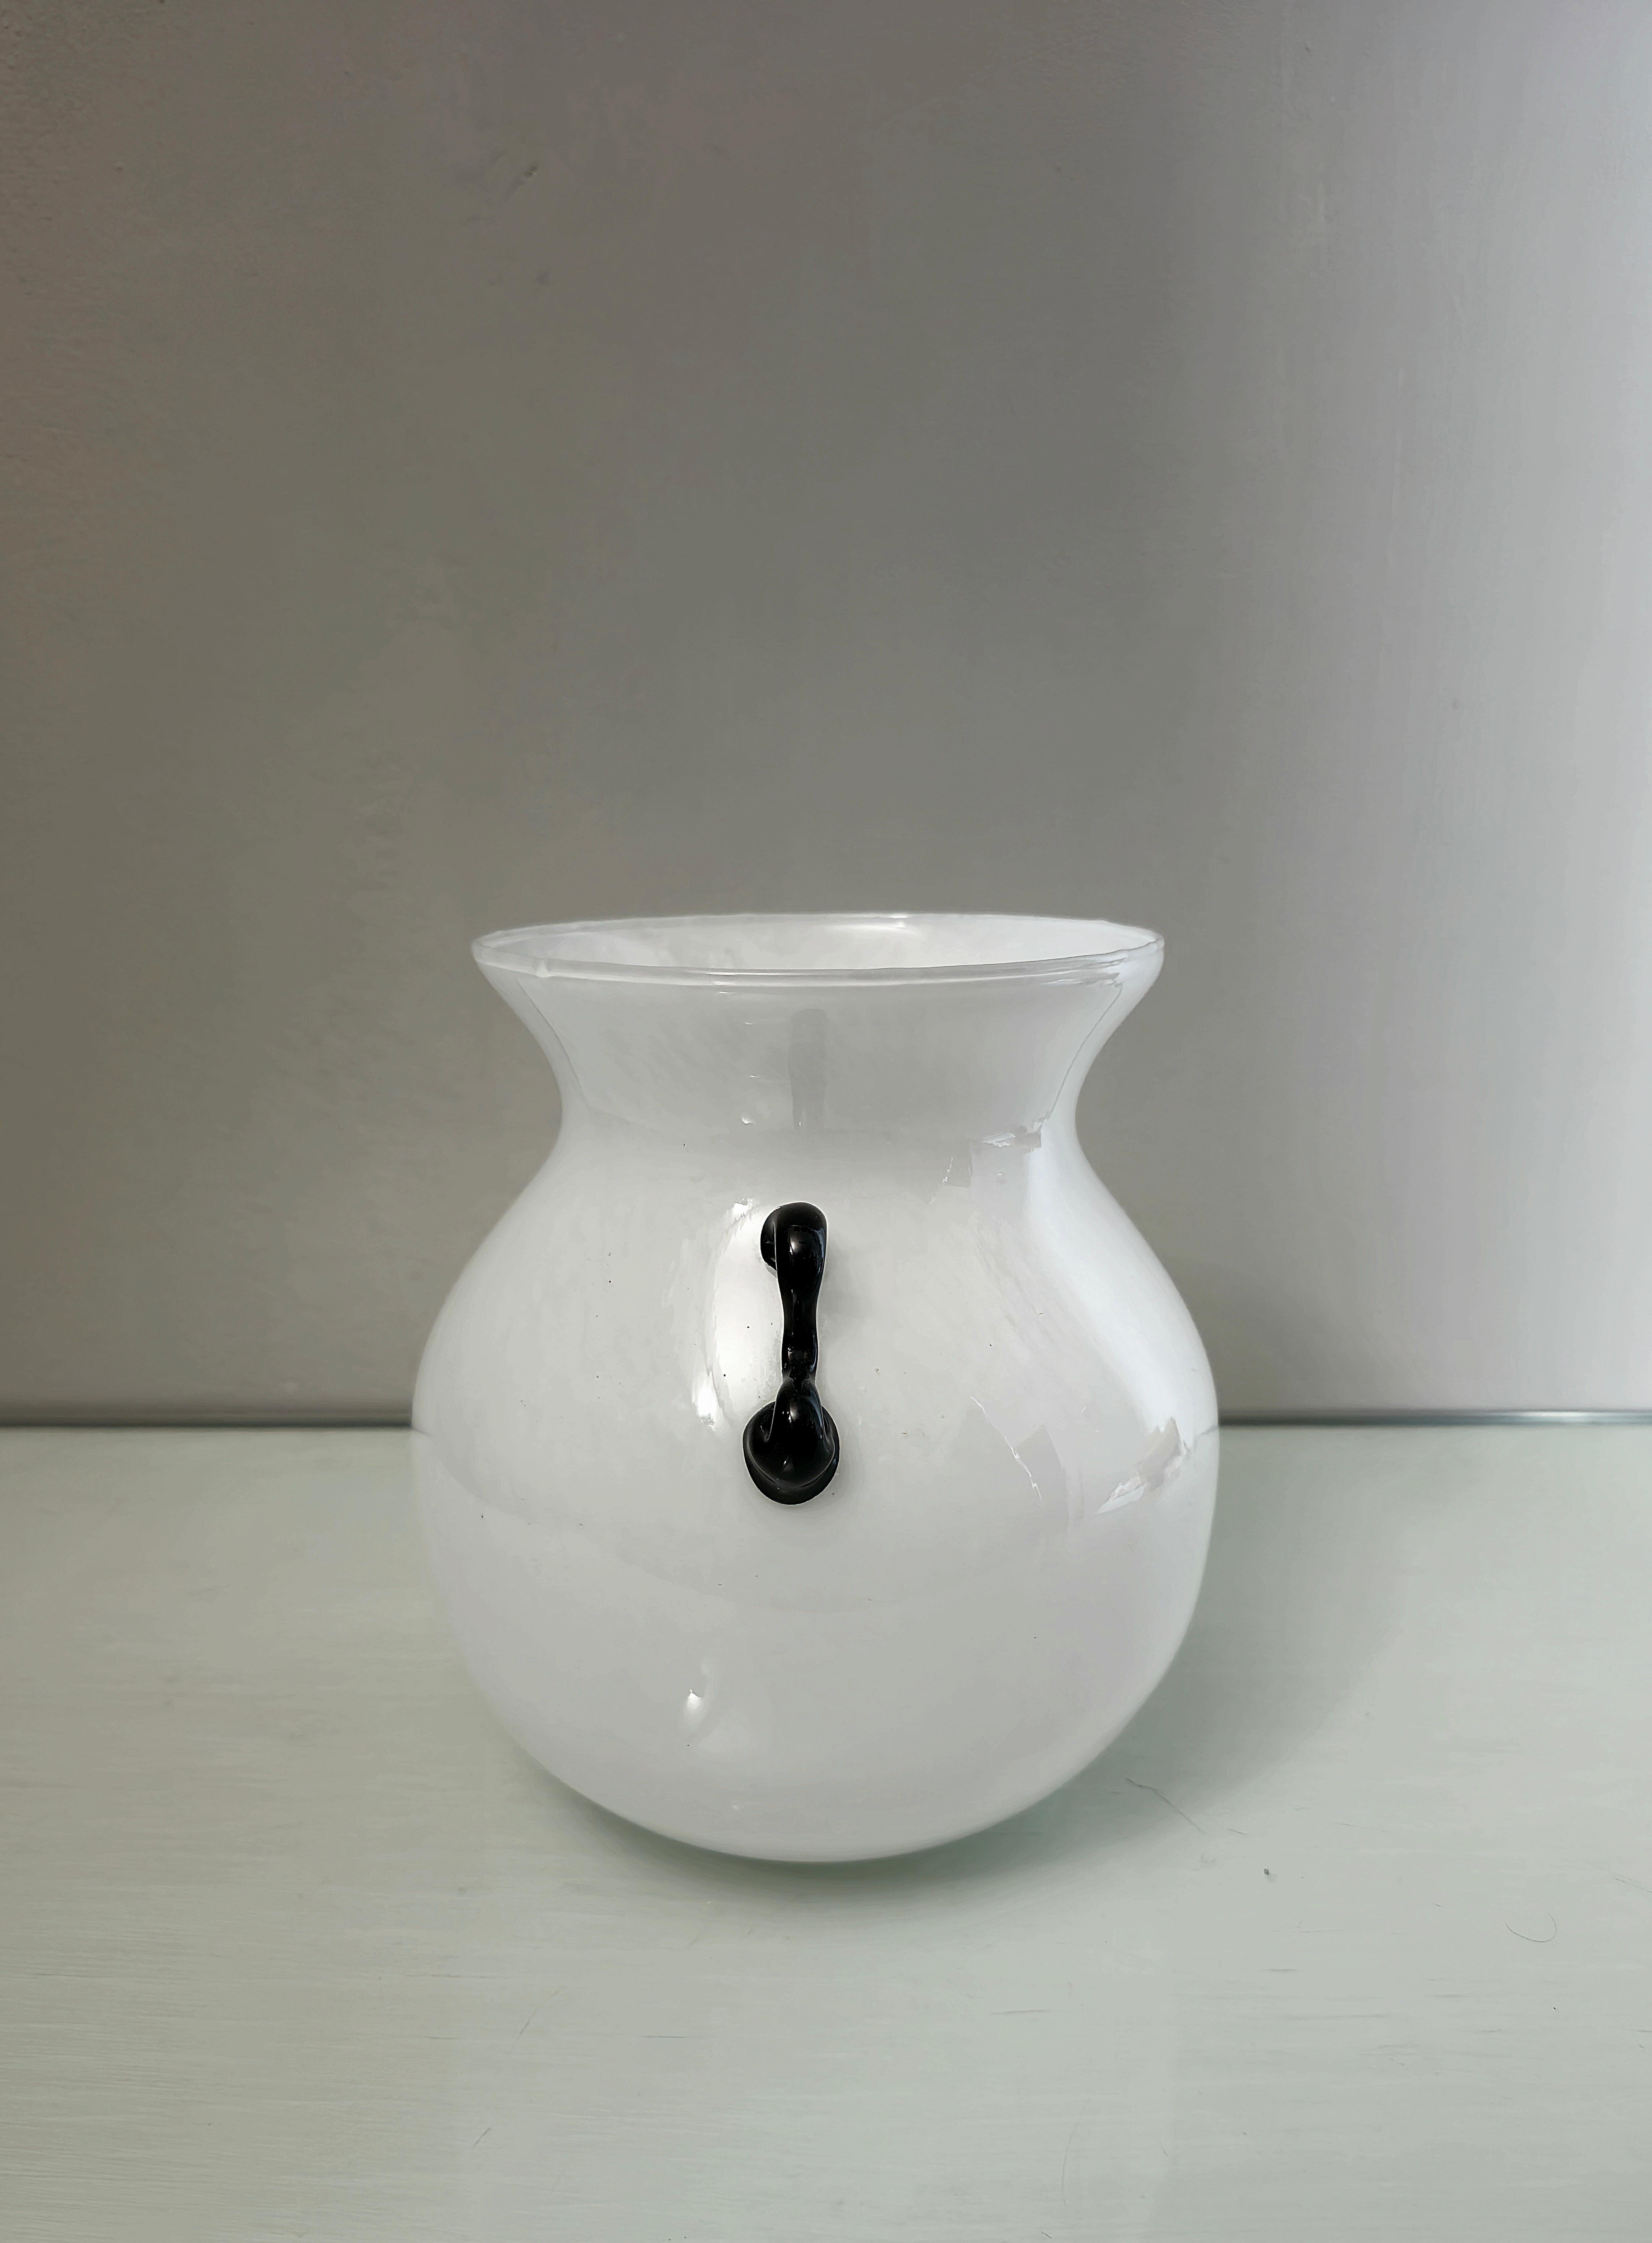 Decorative Object Vase Murano Glass Cenedese Midcentury Modern Italy 1960s For Sale 1